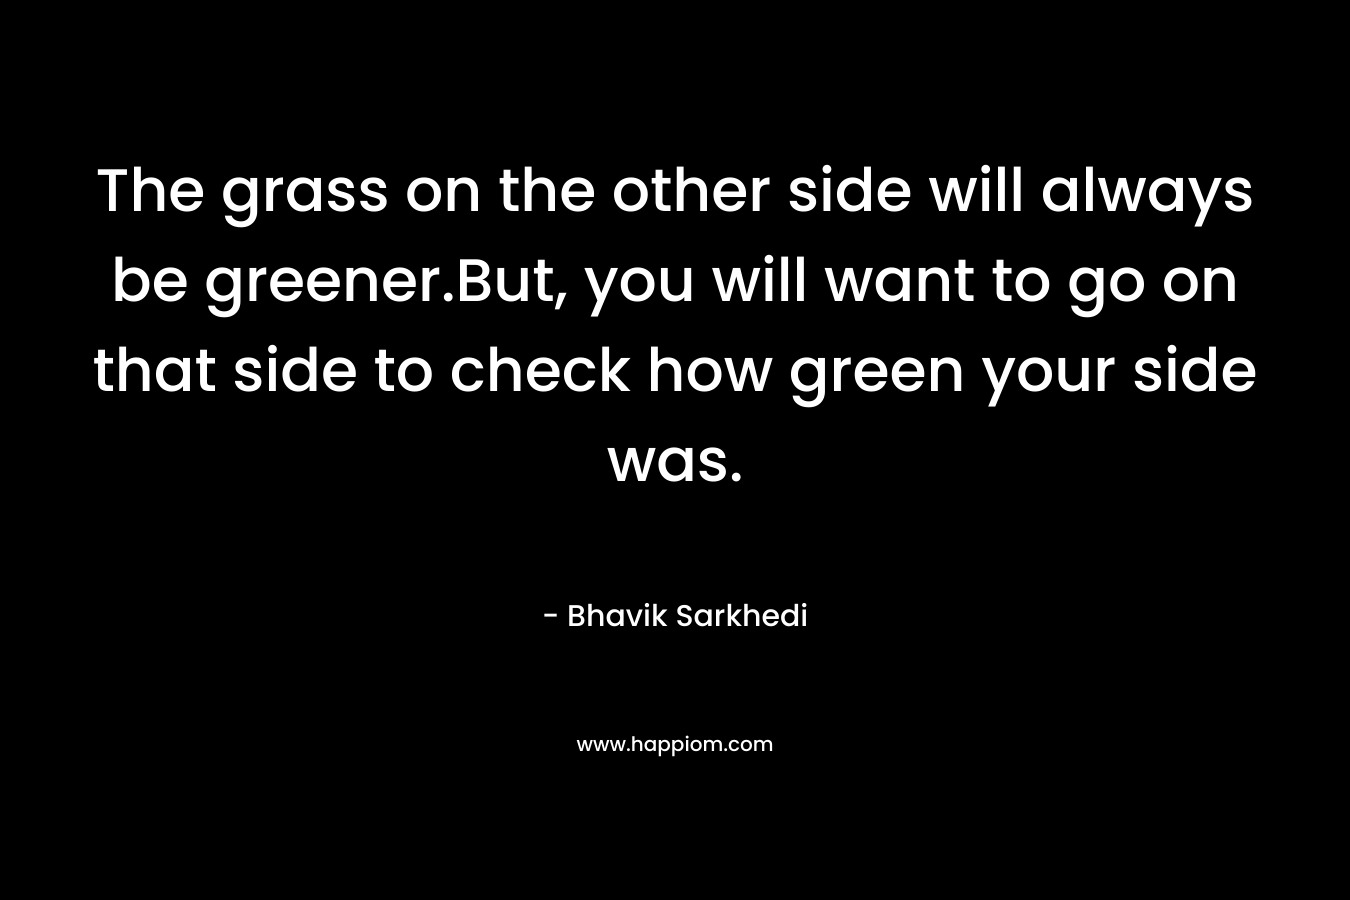 The grass on the other side will always be greener.But, you will want to go on that side to check how green your side was. – Bhavik Sarkhedi